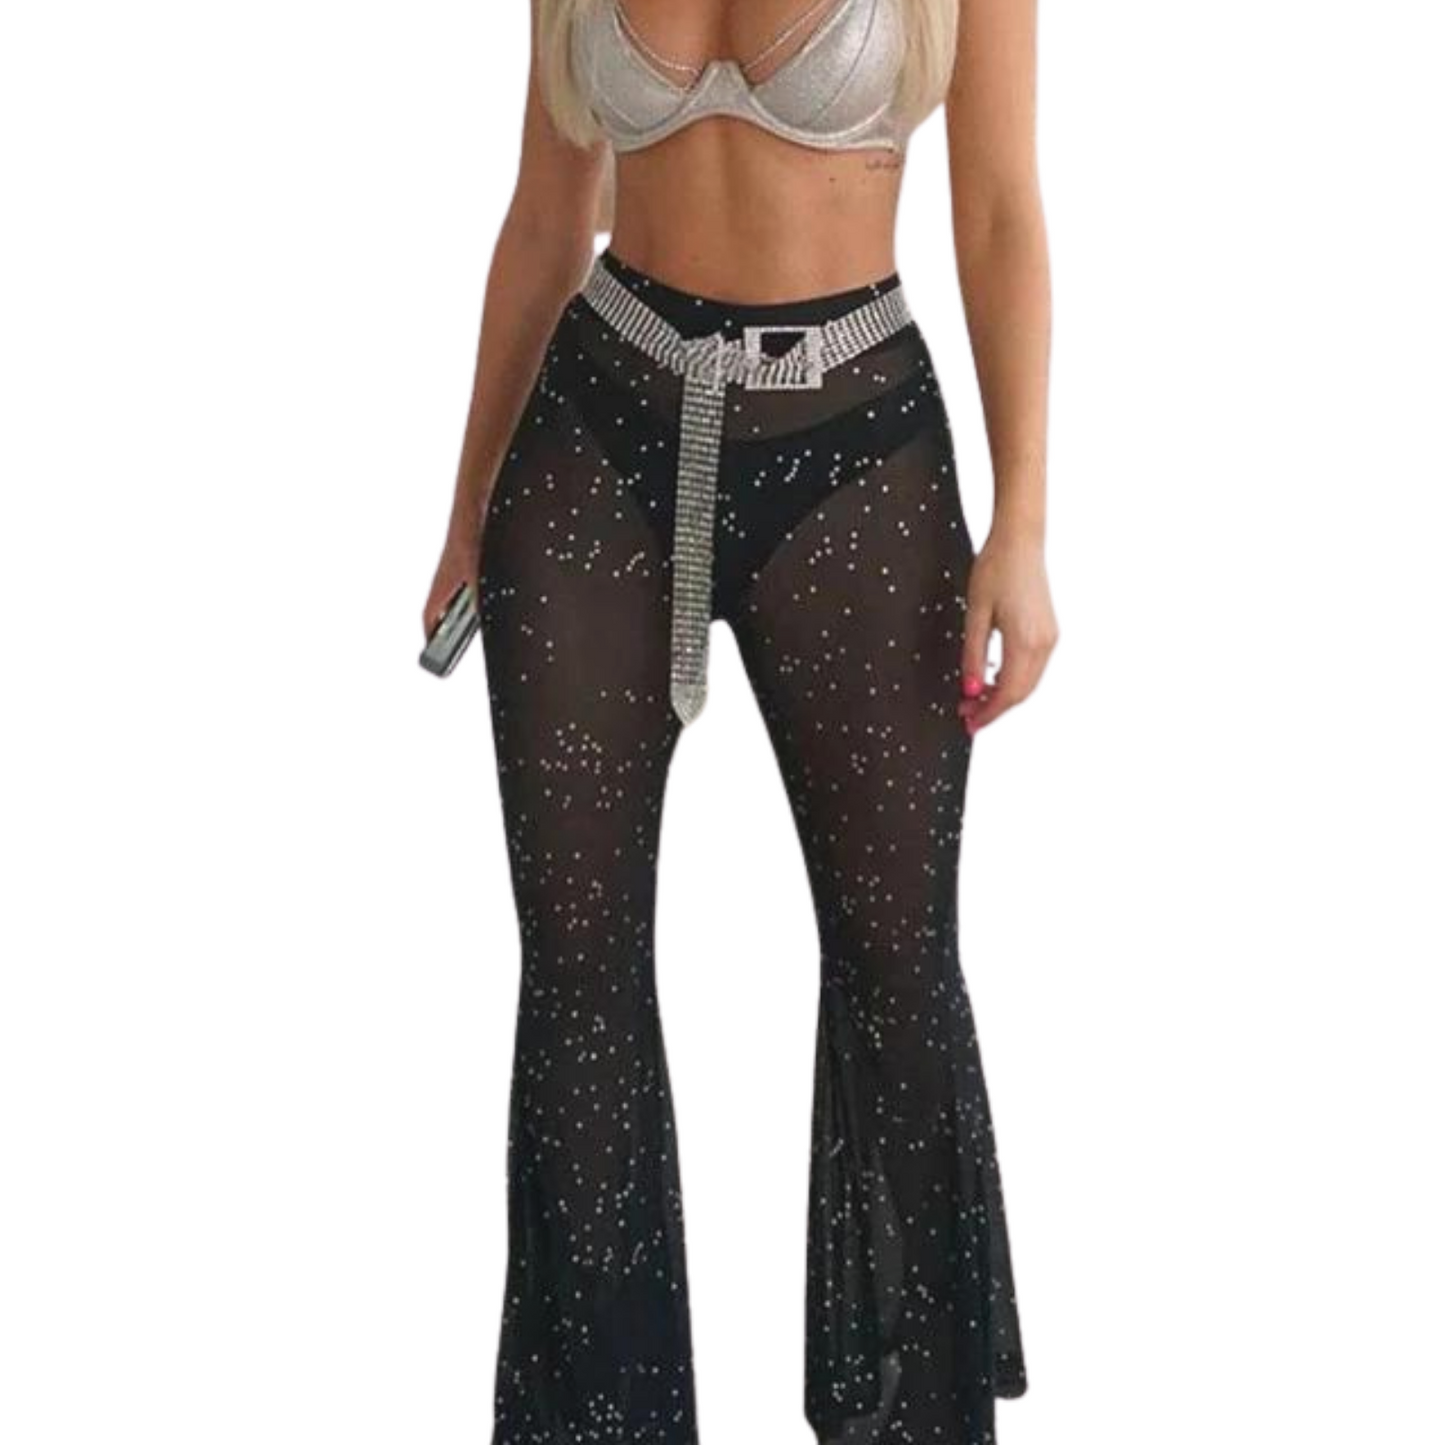 black sparkly mesh flare pants for festivals and raves